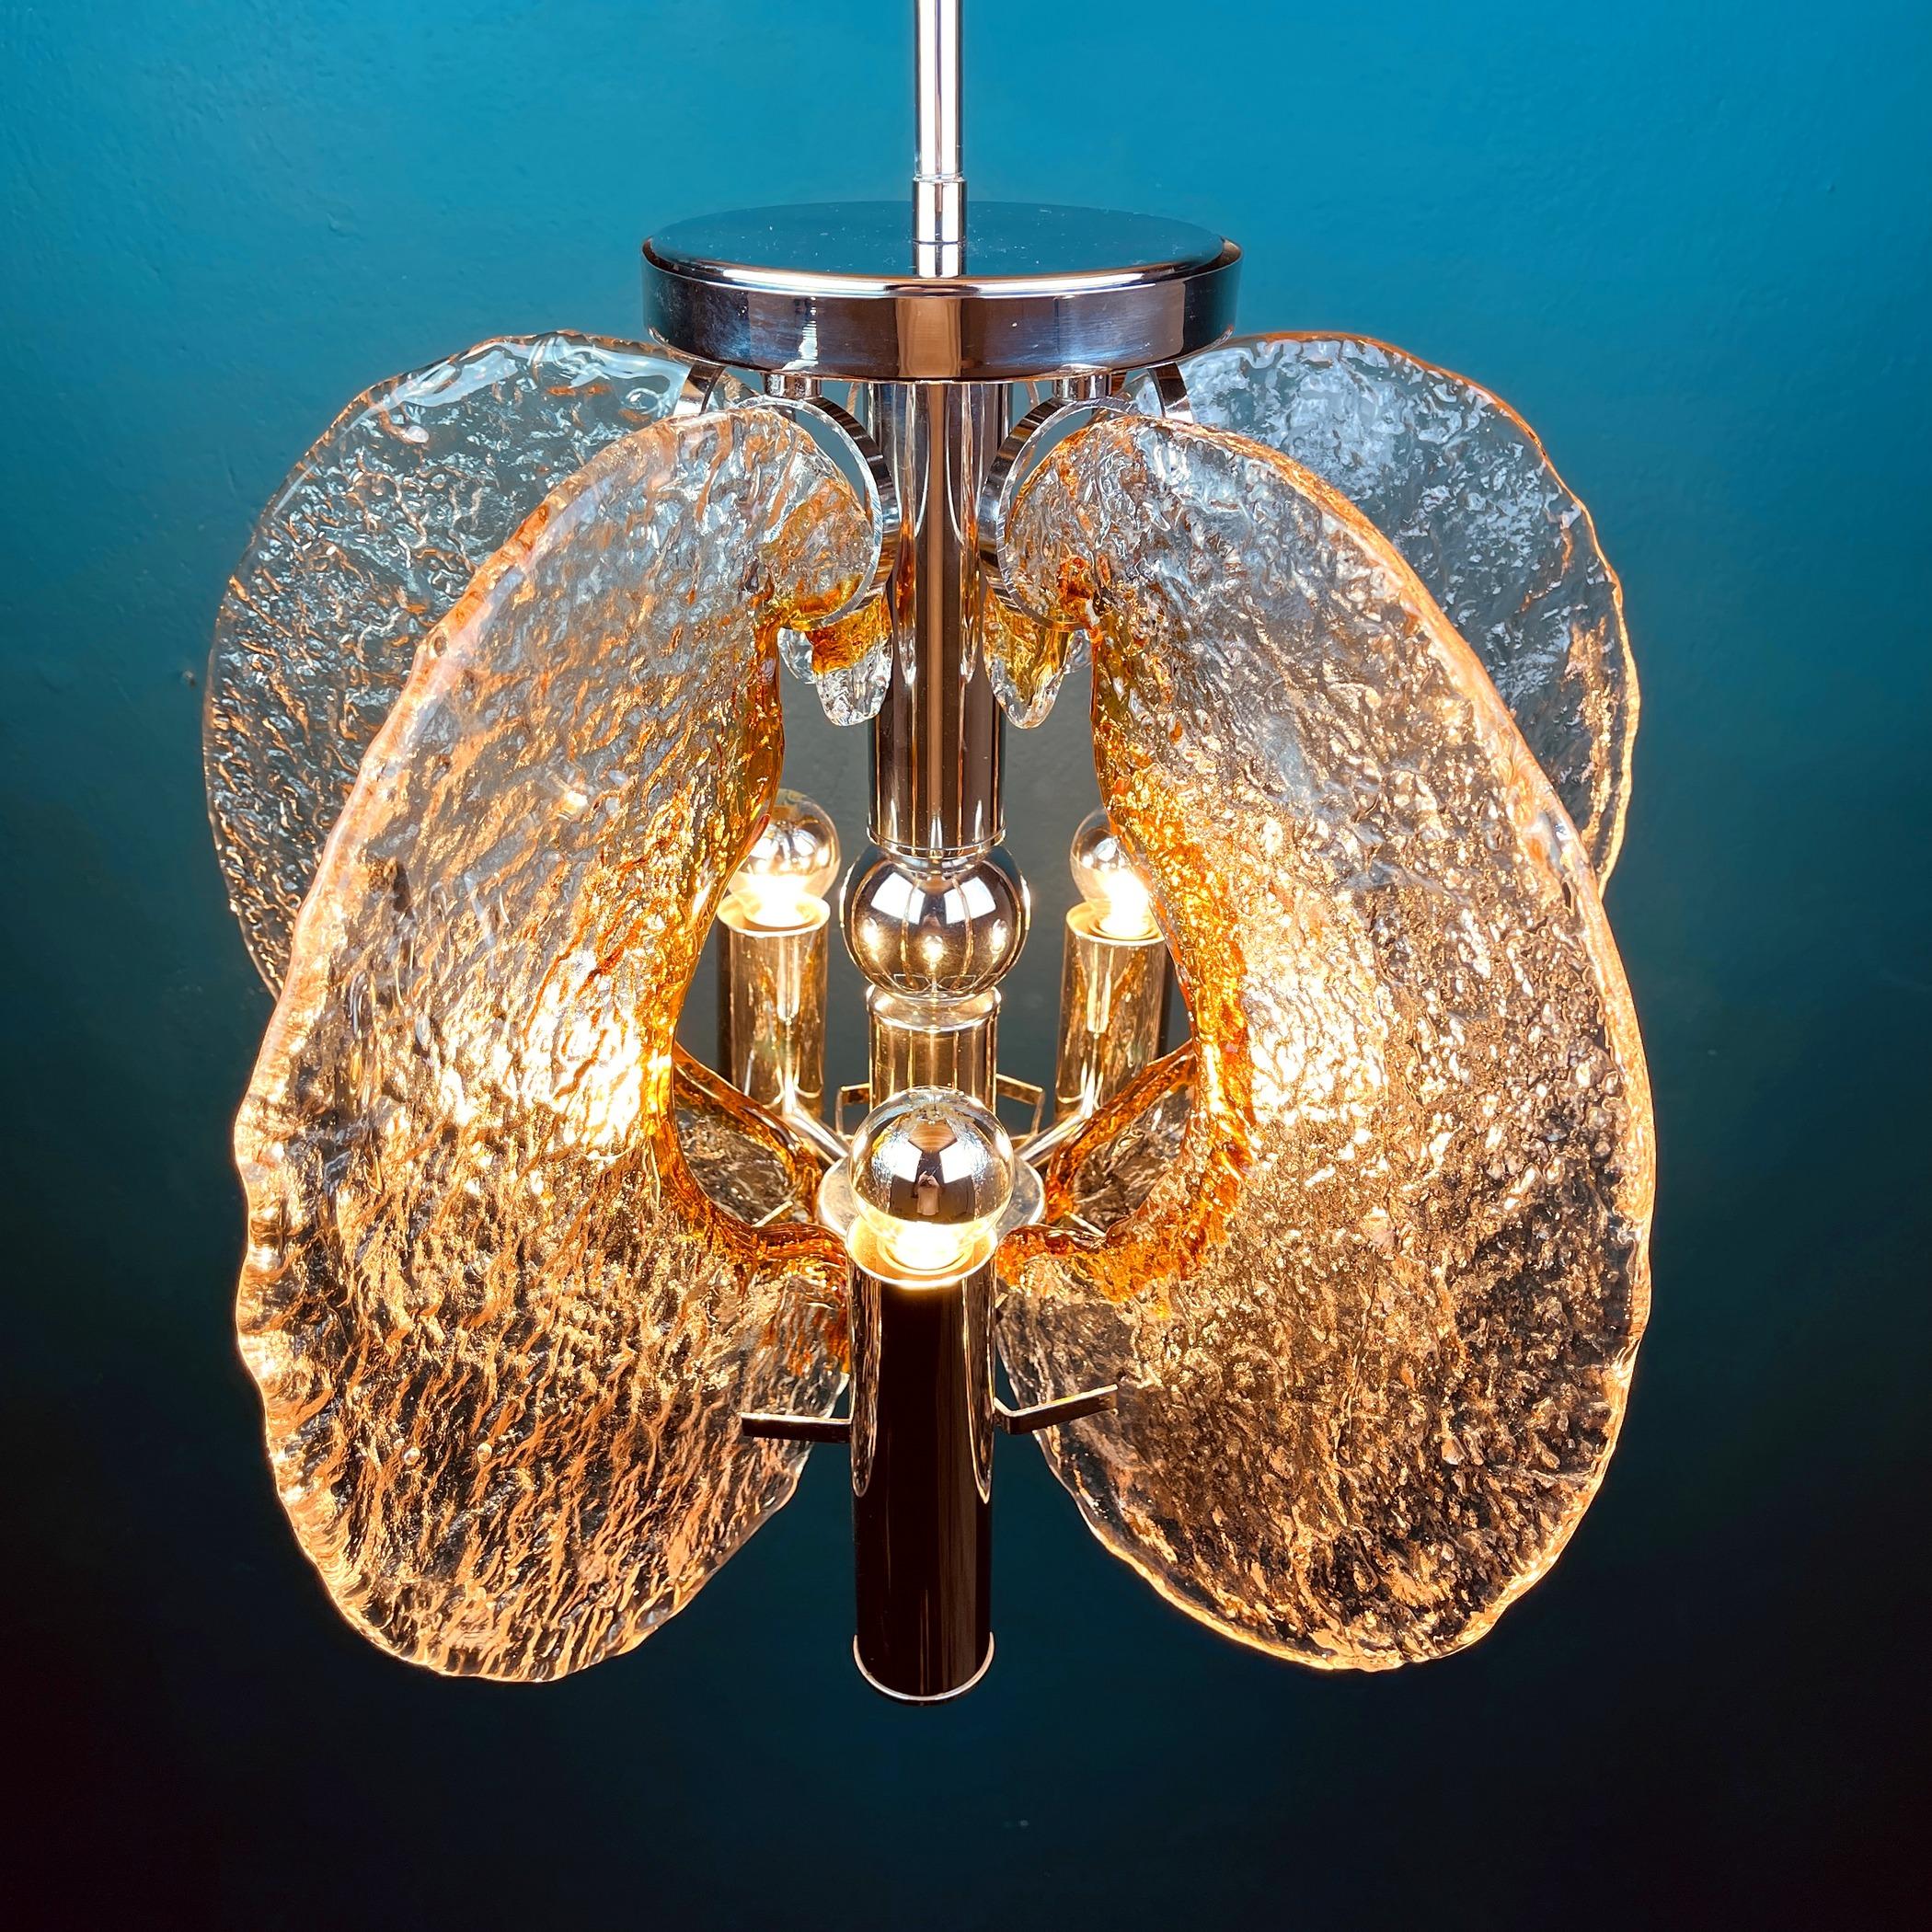 Rare gorgeous ice Murano glass chandelier by Mazzega. Made in Italy in the 1970s.
The ice glass effect and shades of gold, amber create a unique atmosphere in the home. It will become a source of pride and, of course, this chandelier will attract